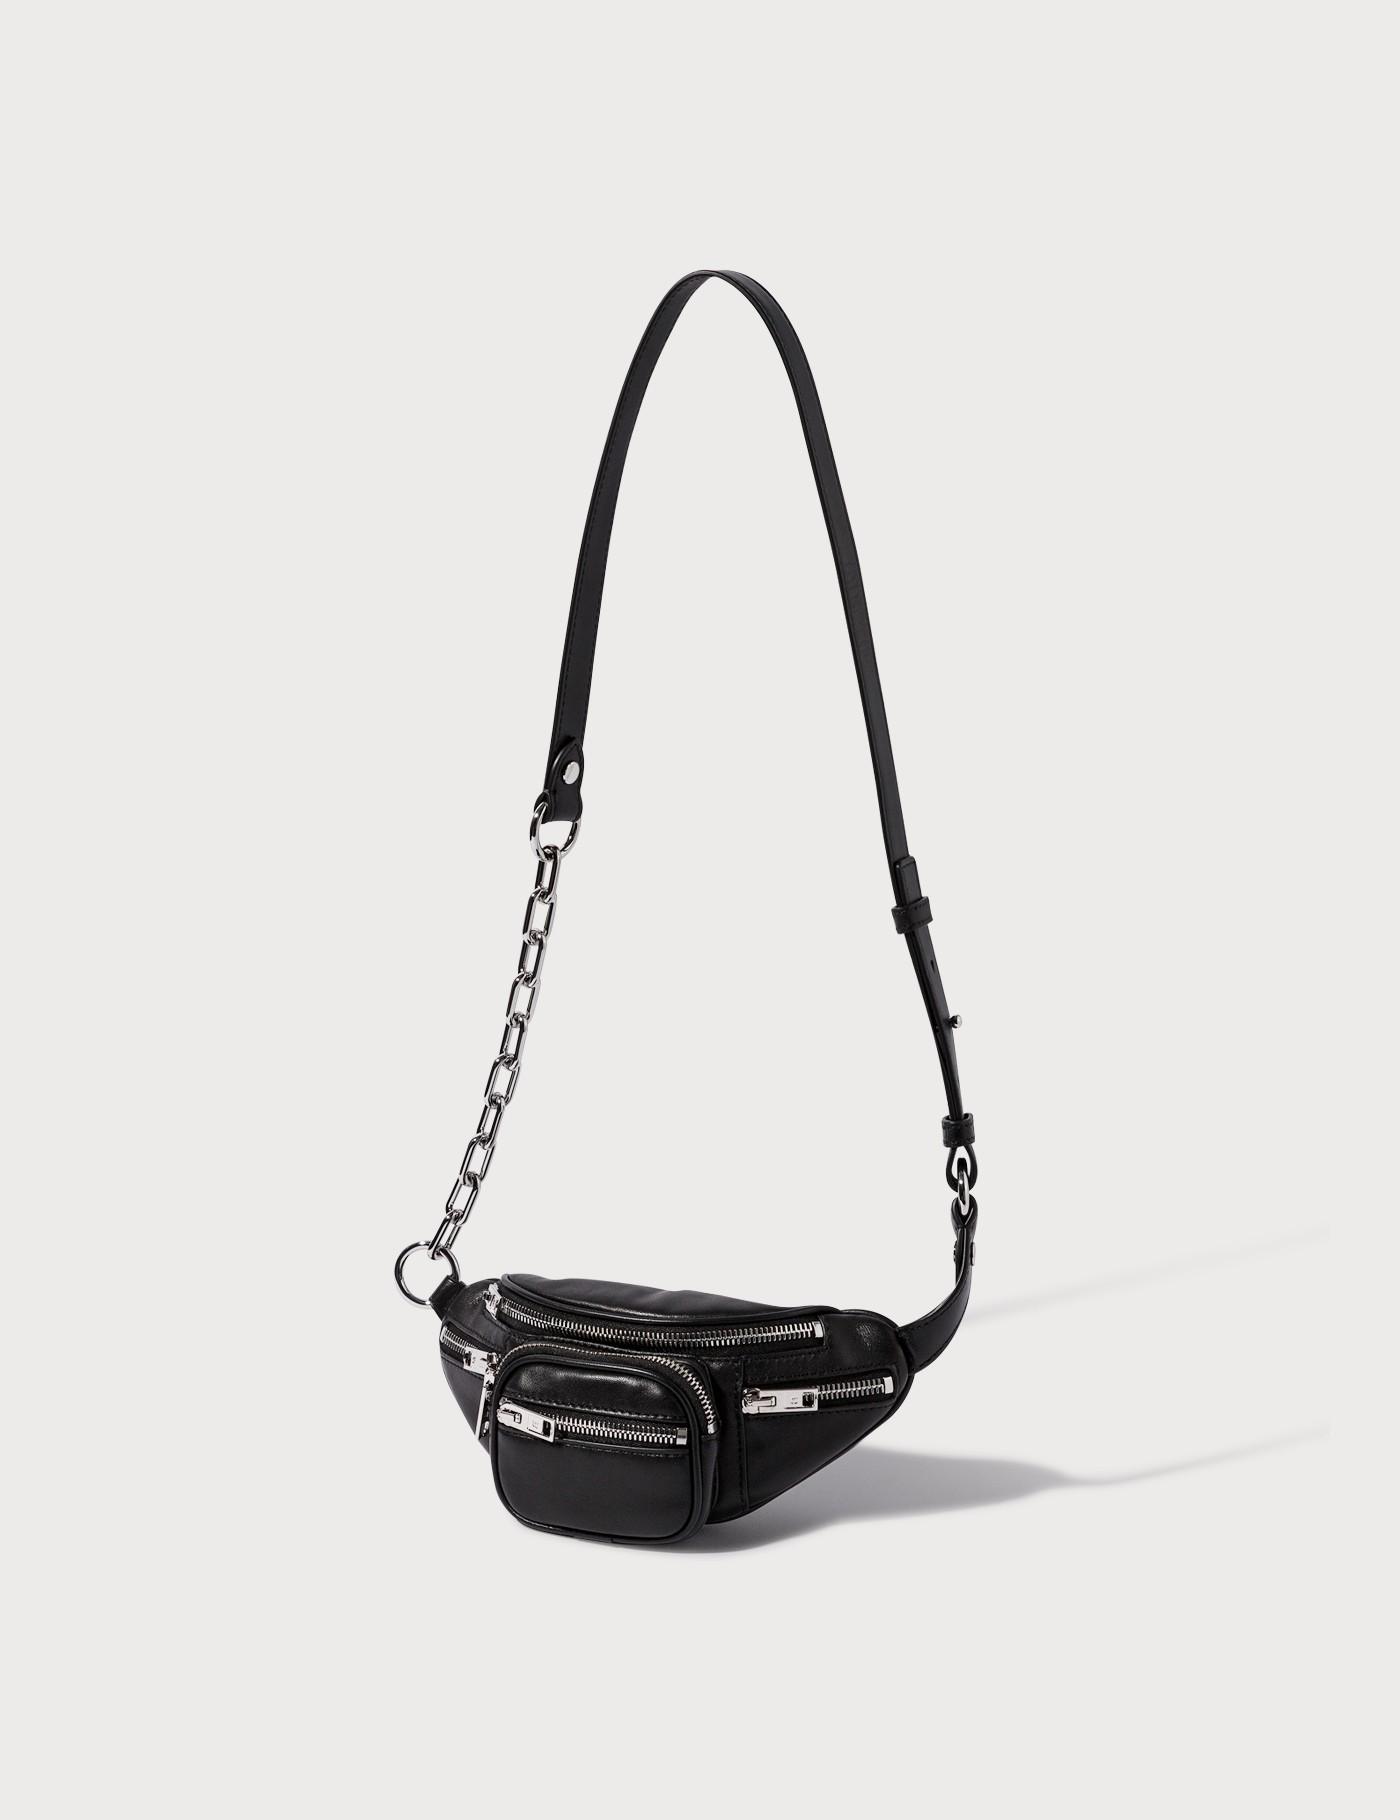 Alexander Wang Leather Attica Mini Fanny Pack in Black - Save 16% | Lyst UK